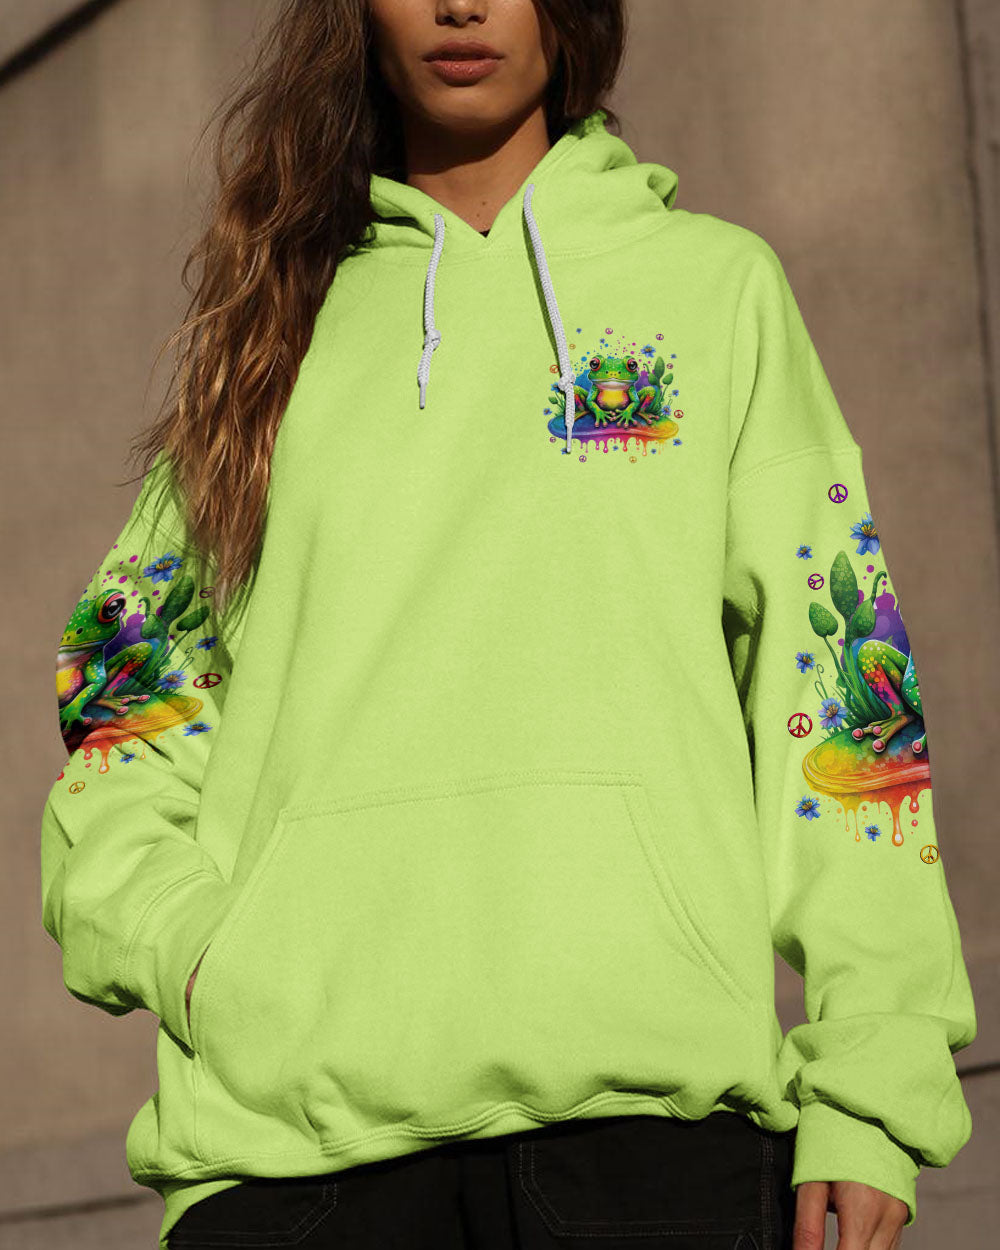 BE YOU THE WORLD WILL ADJUST FROG ALL OVER PRINT - TLNT2808234 